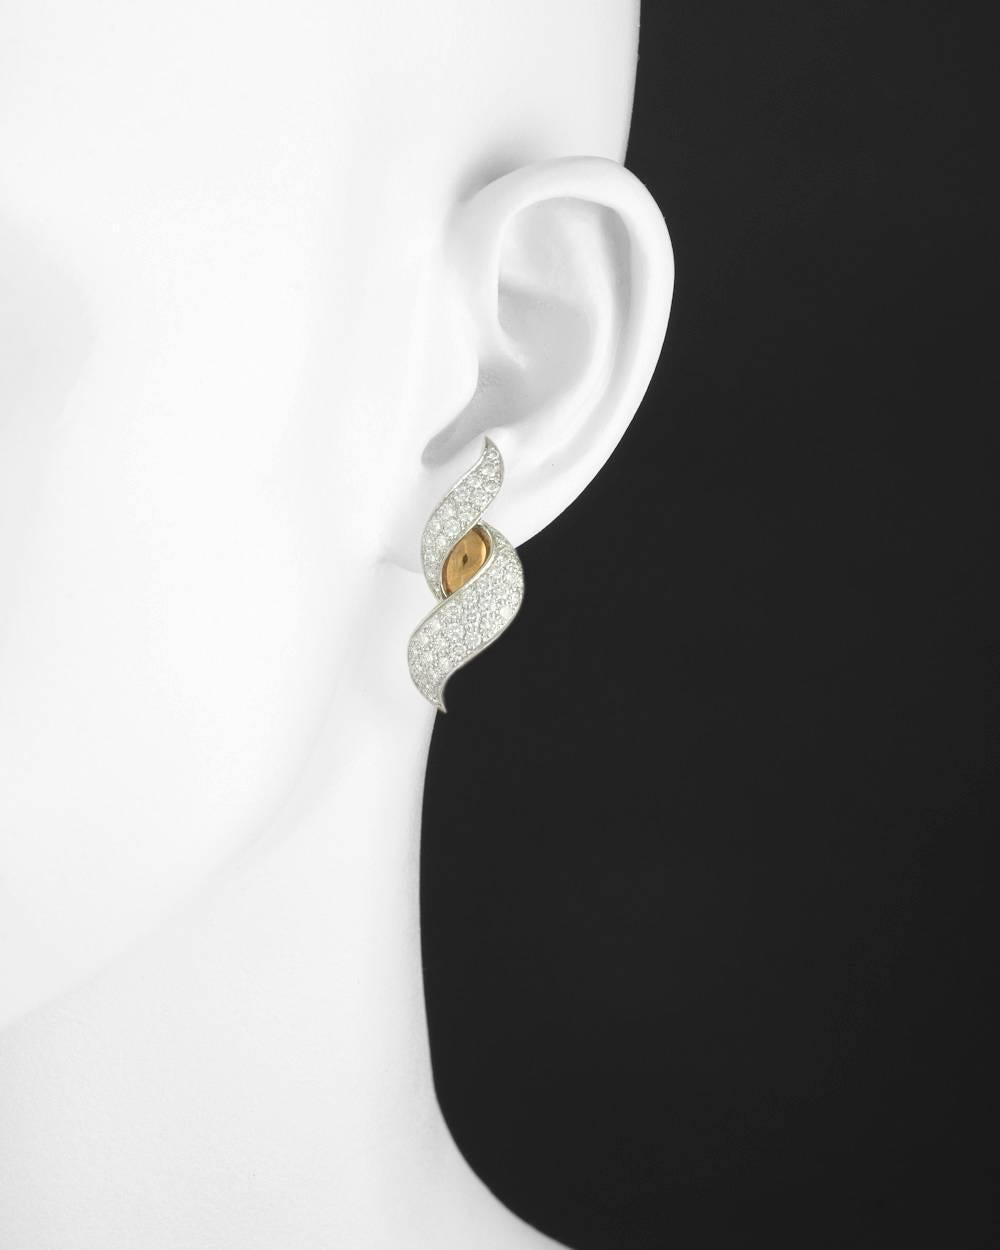 Elegant scroll motif earclips, showcasing two delicate swirling motif pavé-set diamond sections in platinum separated by high-polished 18k yellow gold, with gold clip backs (posts may be added upon customer request), numbered 702283, signed 'HB'